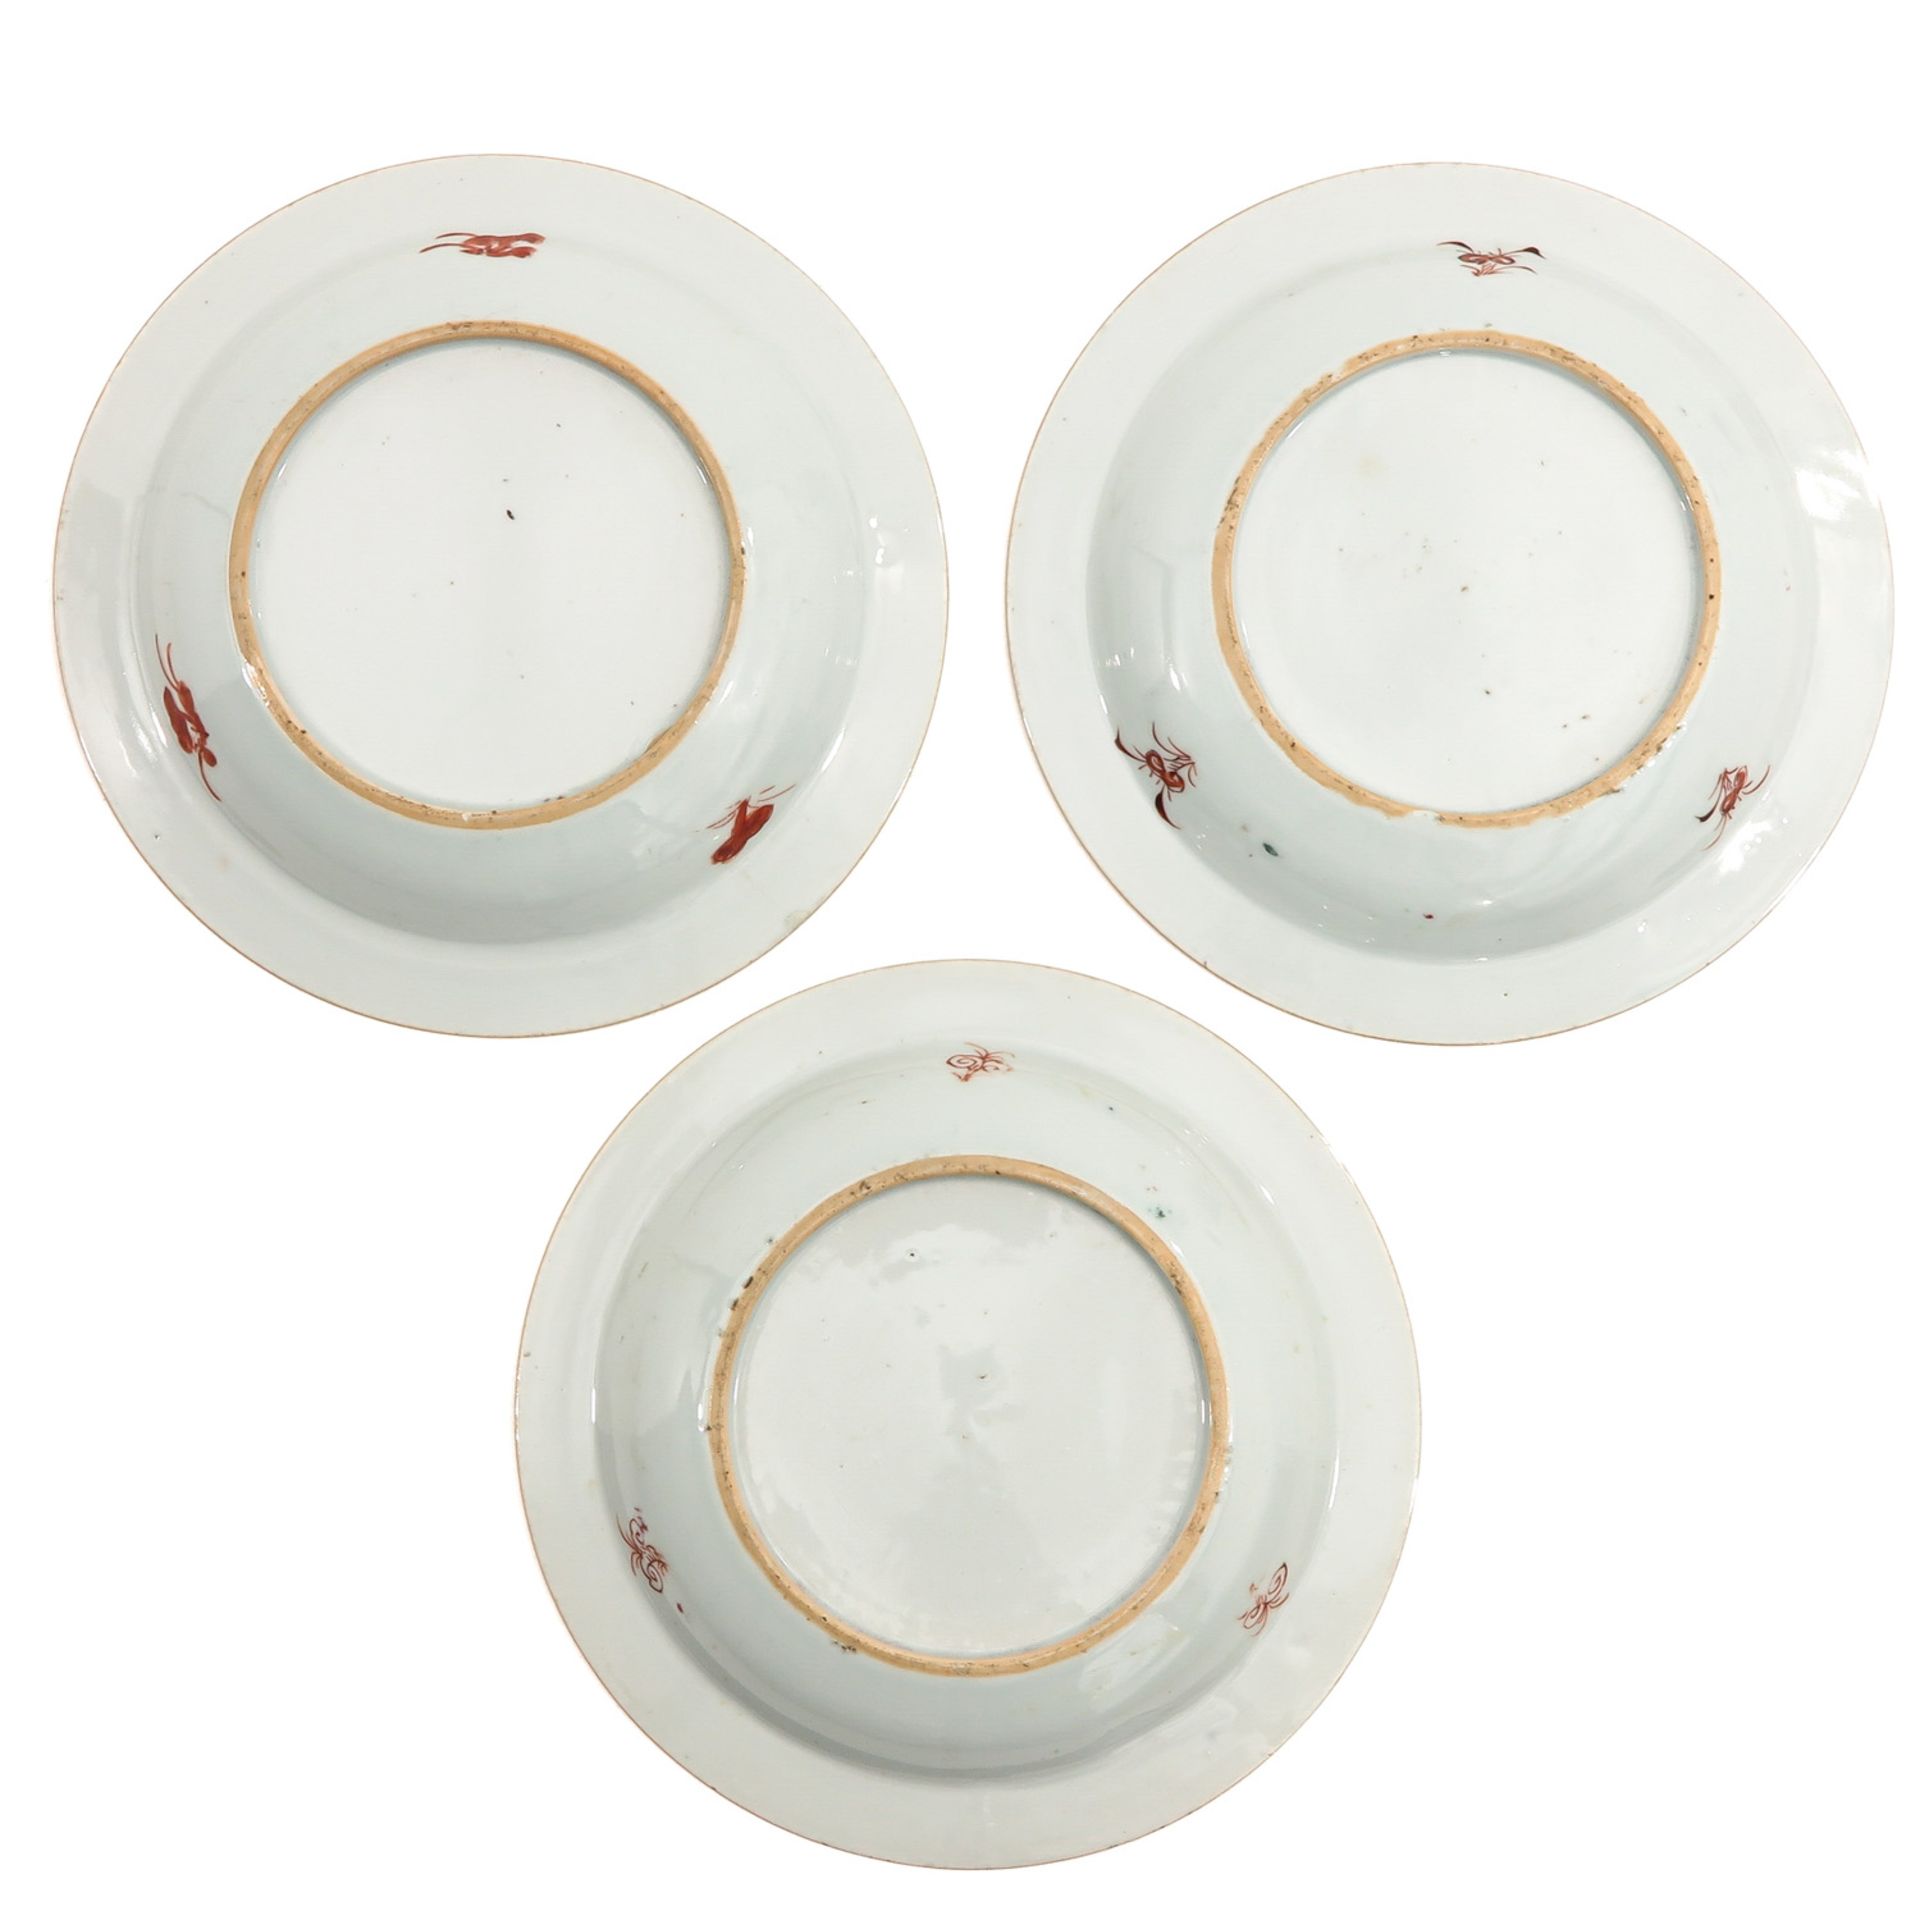 A Series of 3 Famille Rose Plates - Image 2 of 10